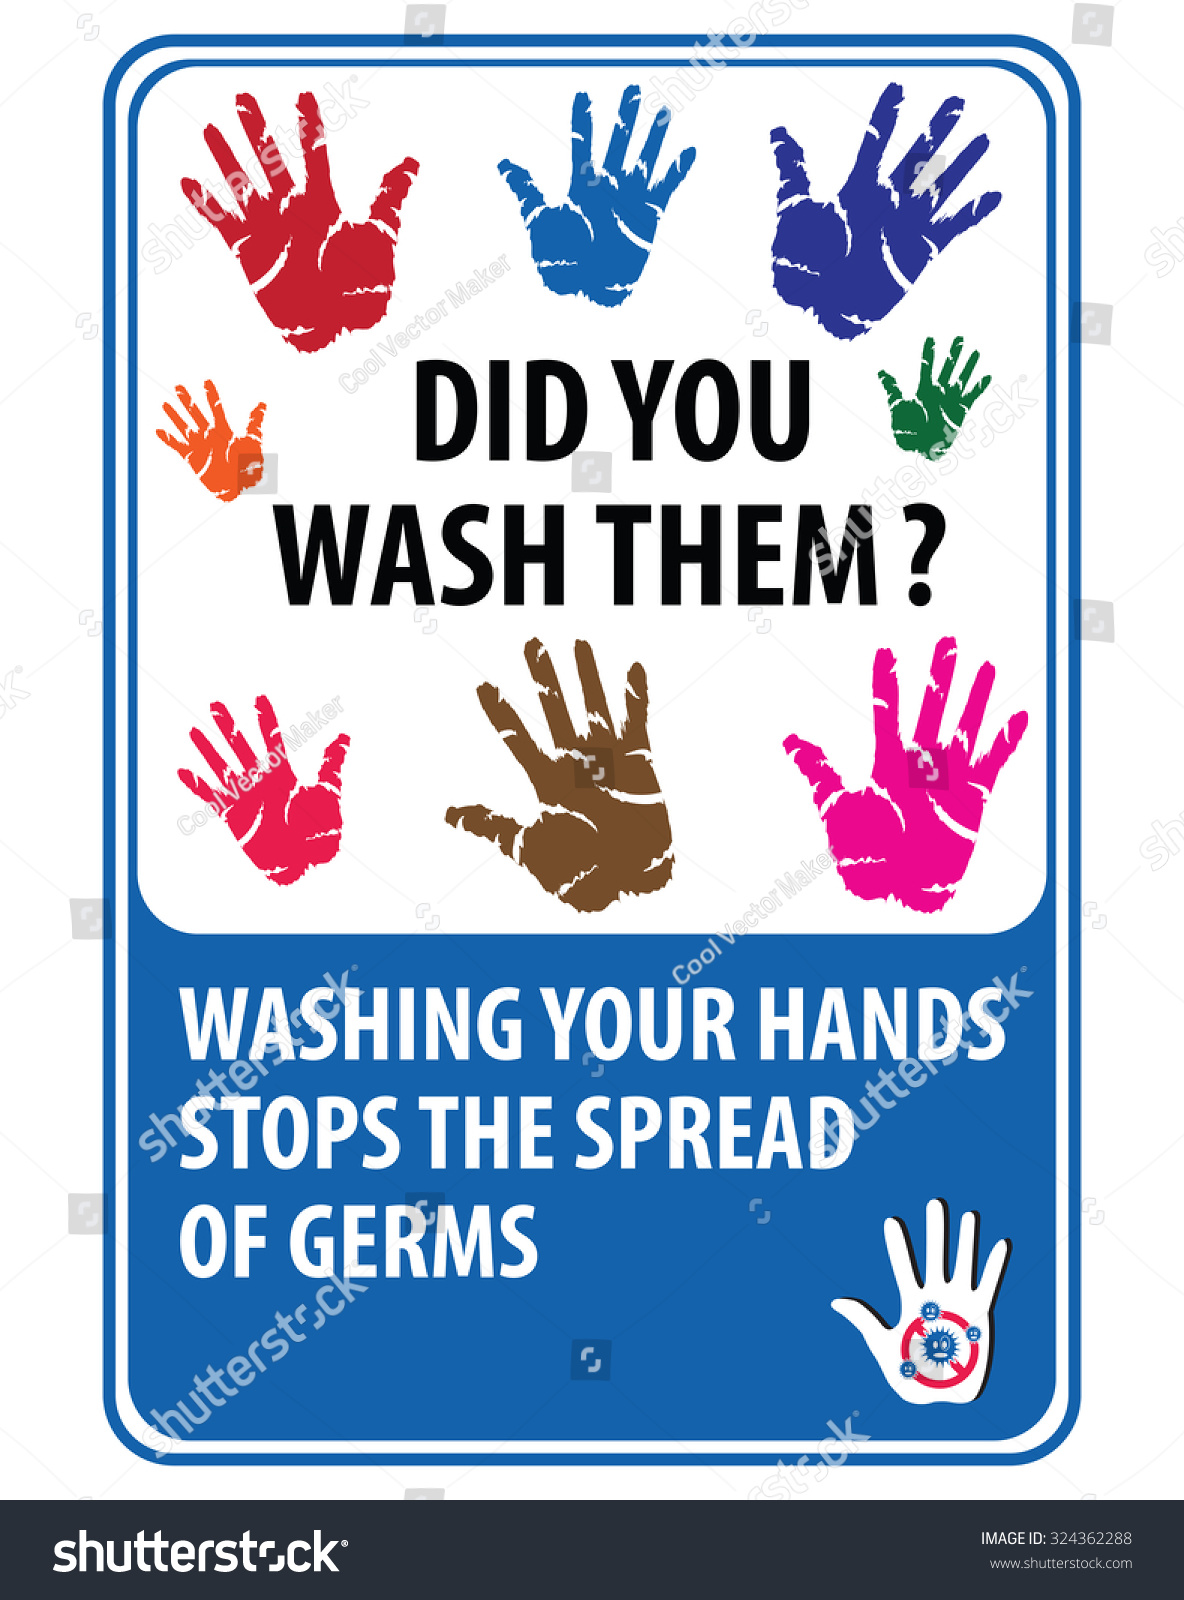 Wash Your Hands Signs For Kids (Washing Your Hands Stops The Spread Of ...